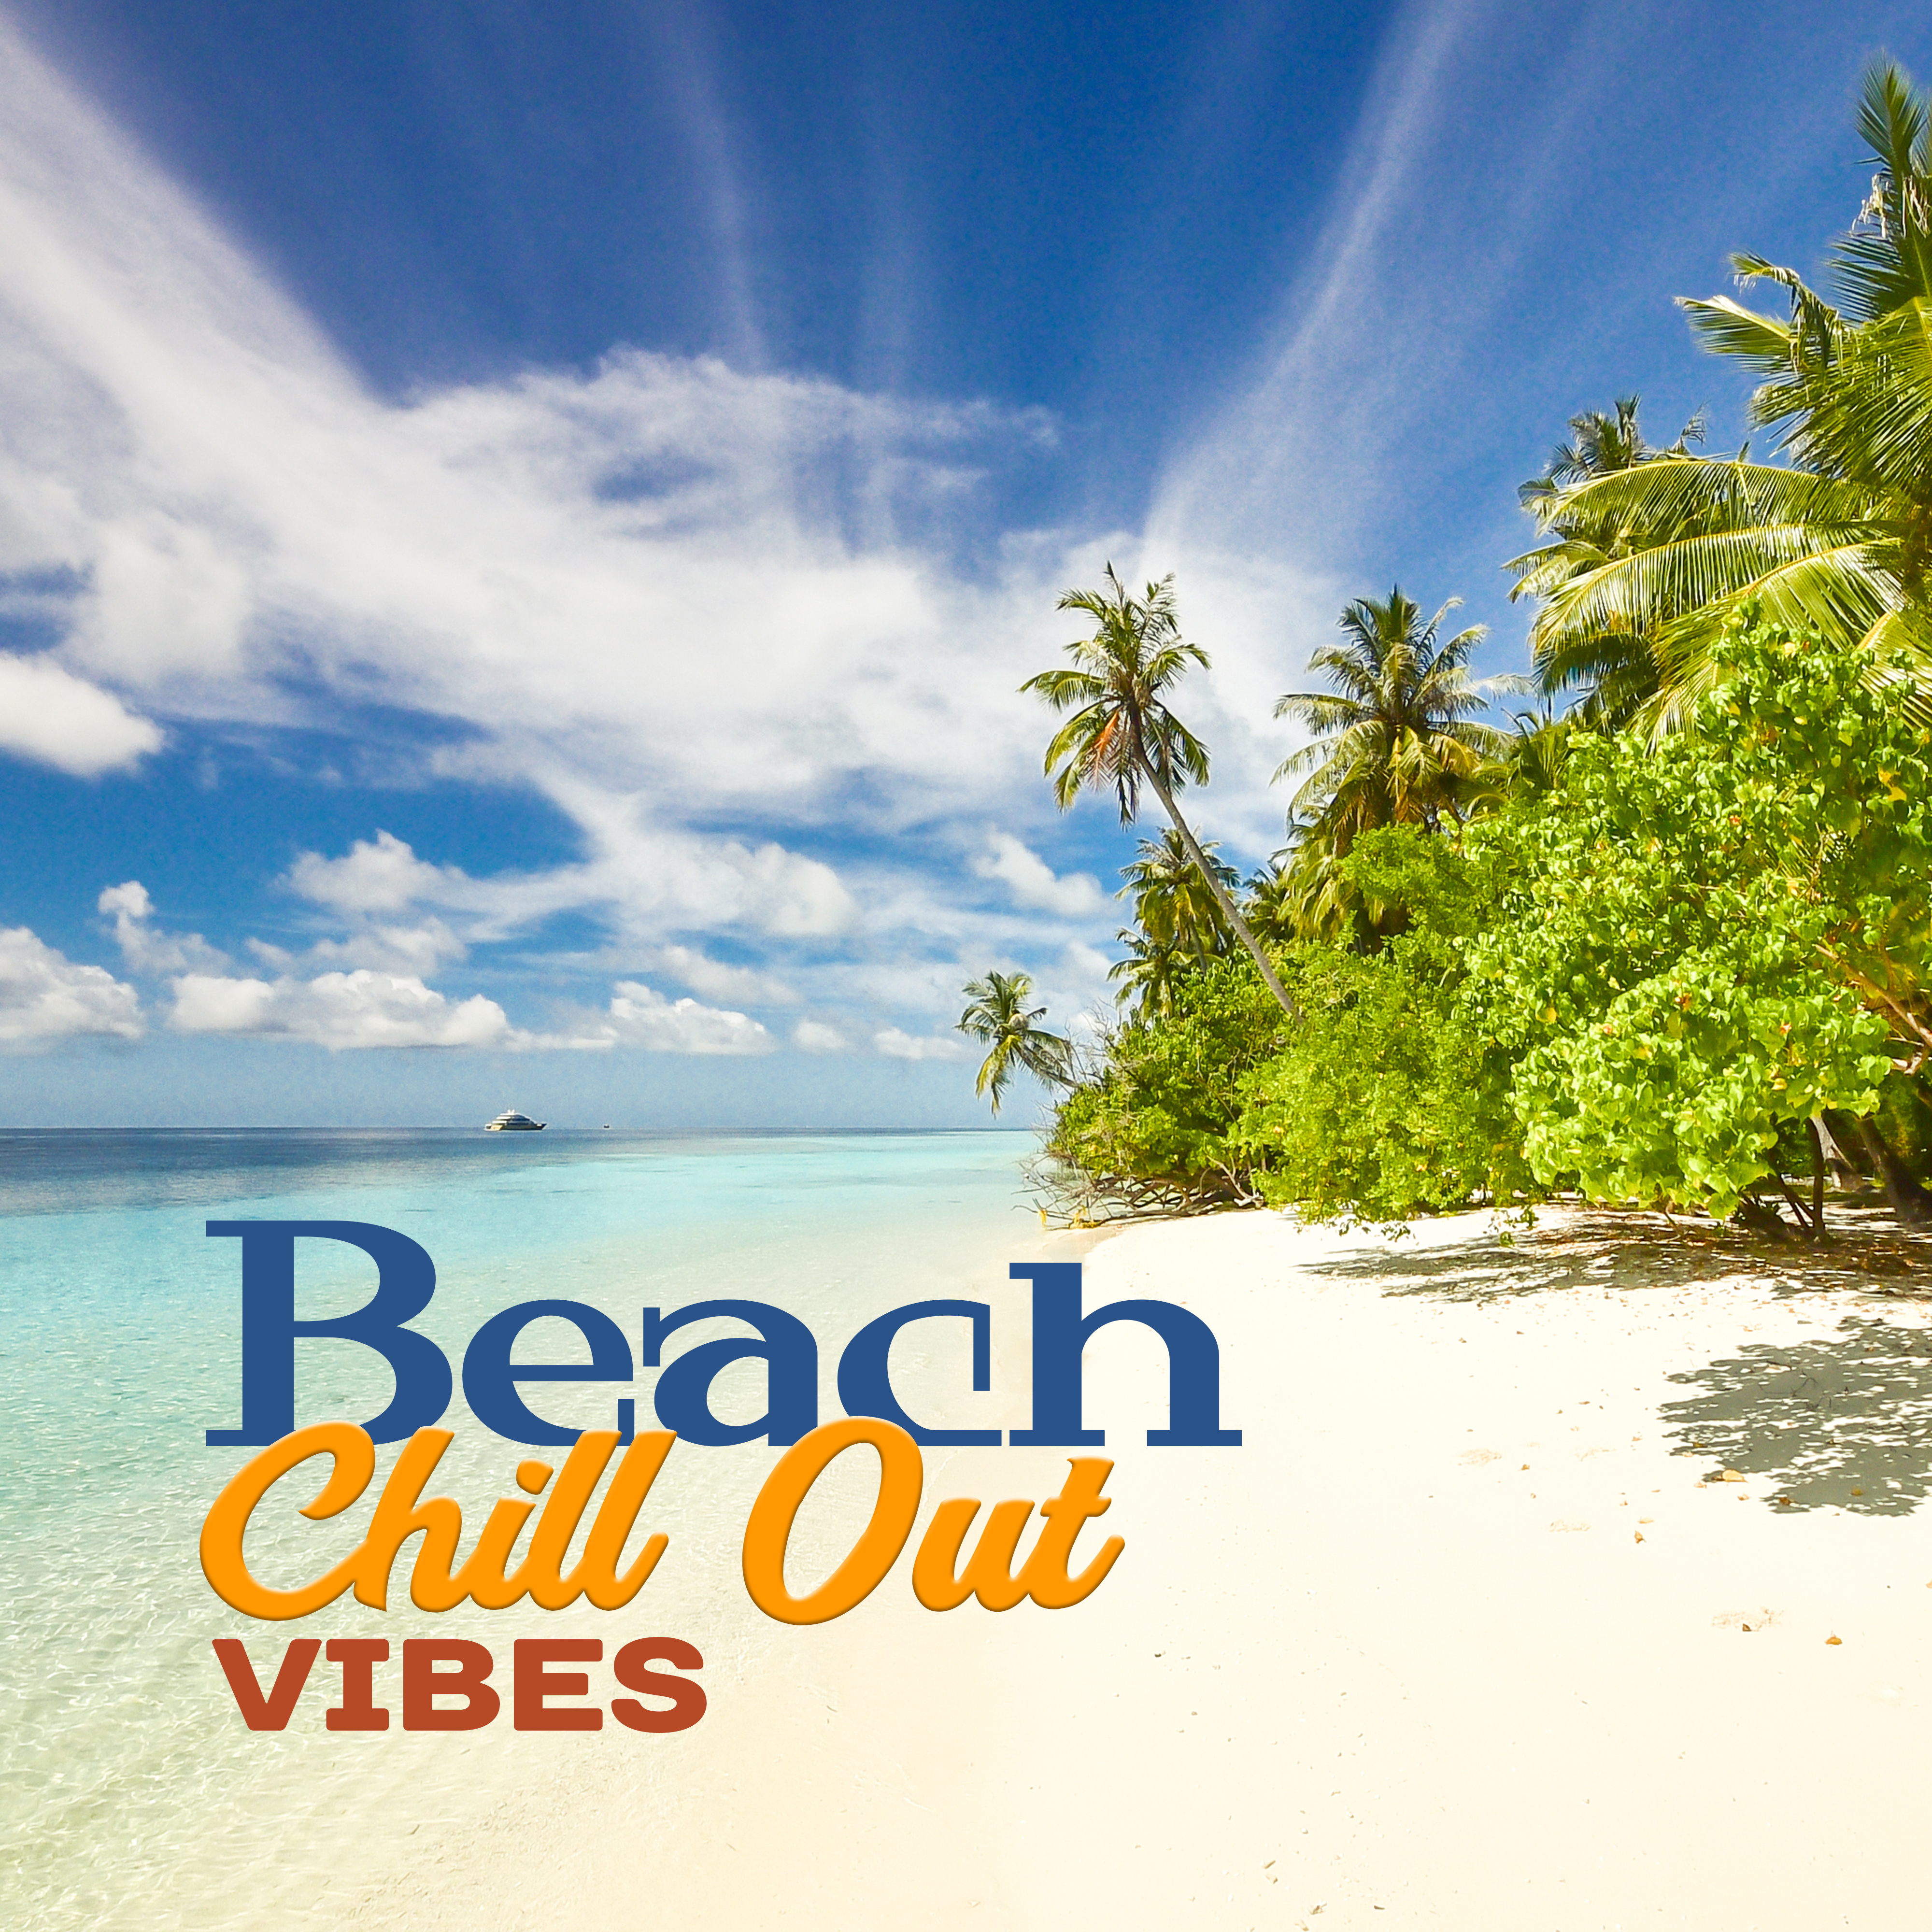 Beach Chill Out Vibes  Beach Relaxation, Summer Music, Rest on the Beach, Coast Vibes